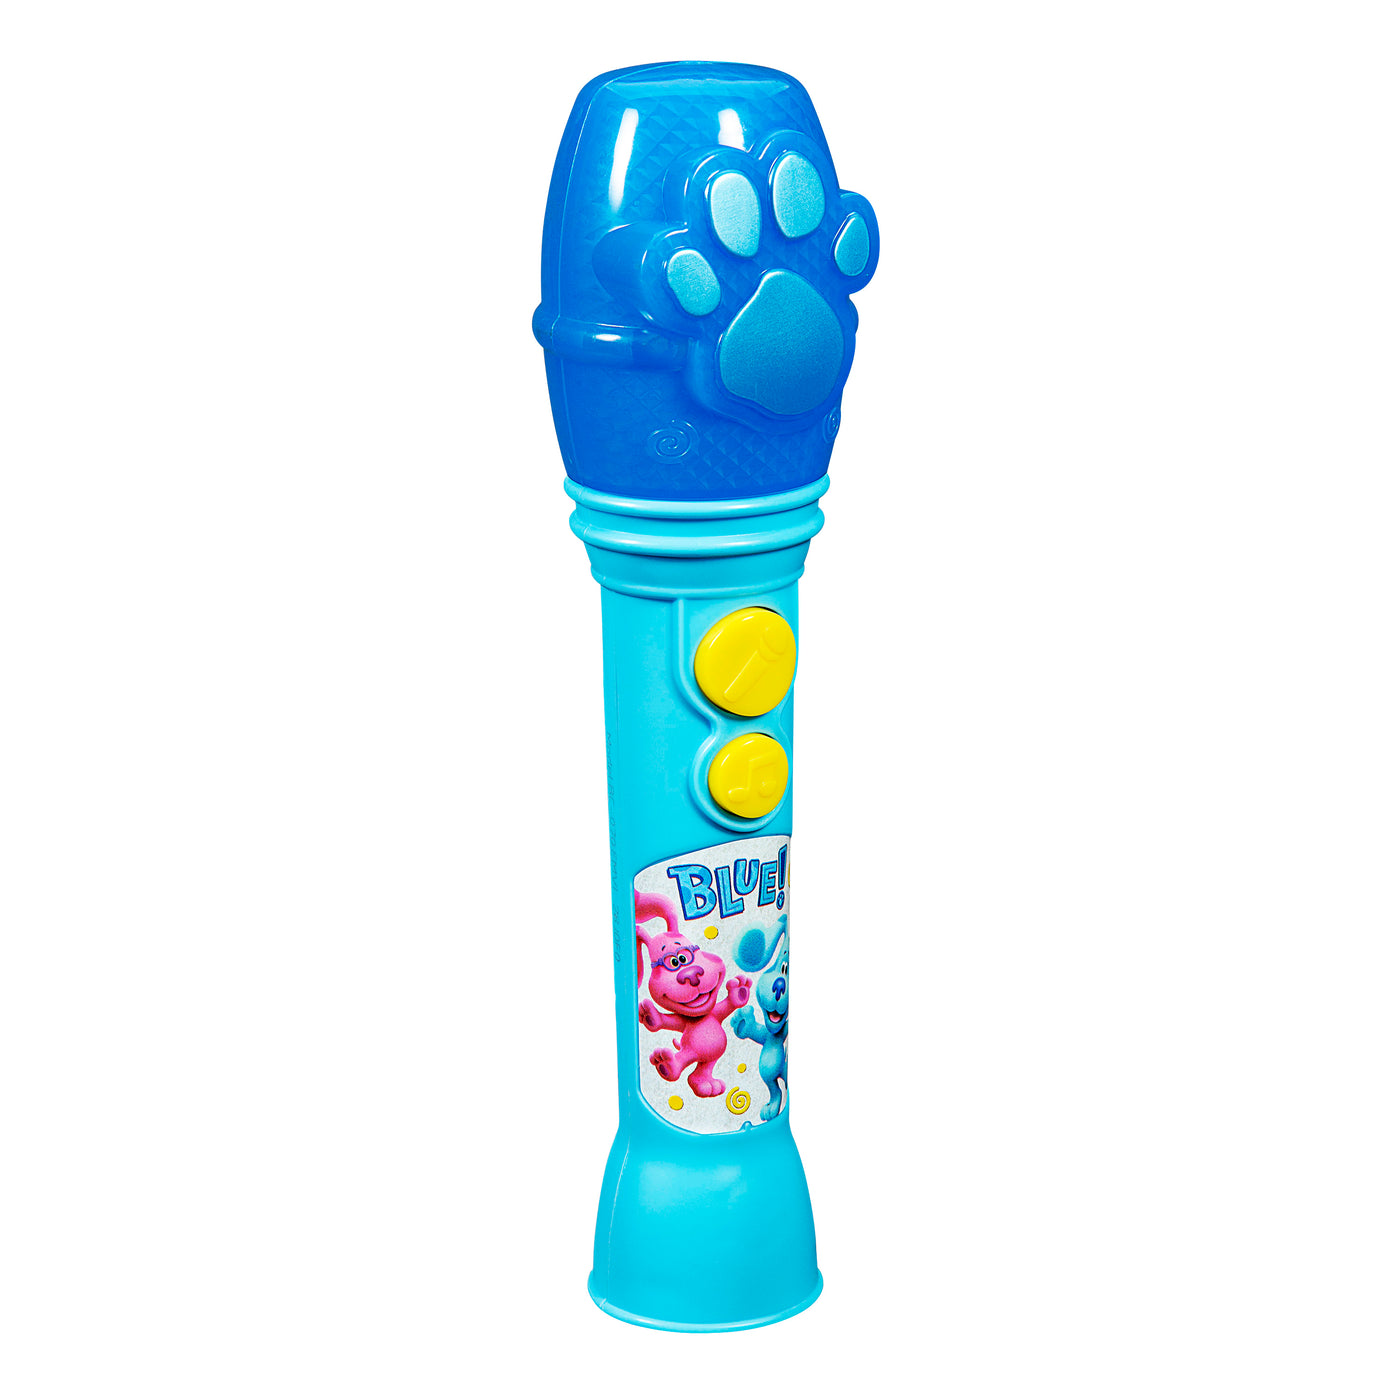 Blue’s Clues Sing Along Microphone Toy for Toddlers